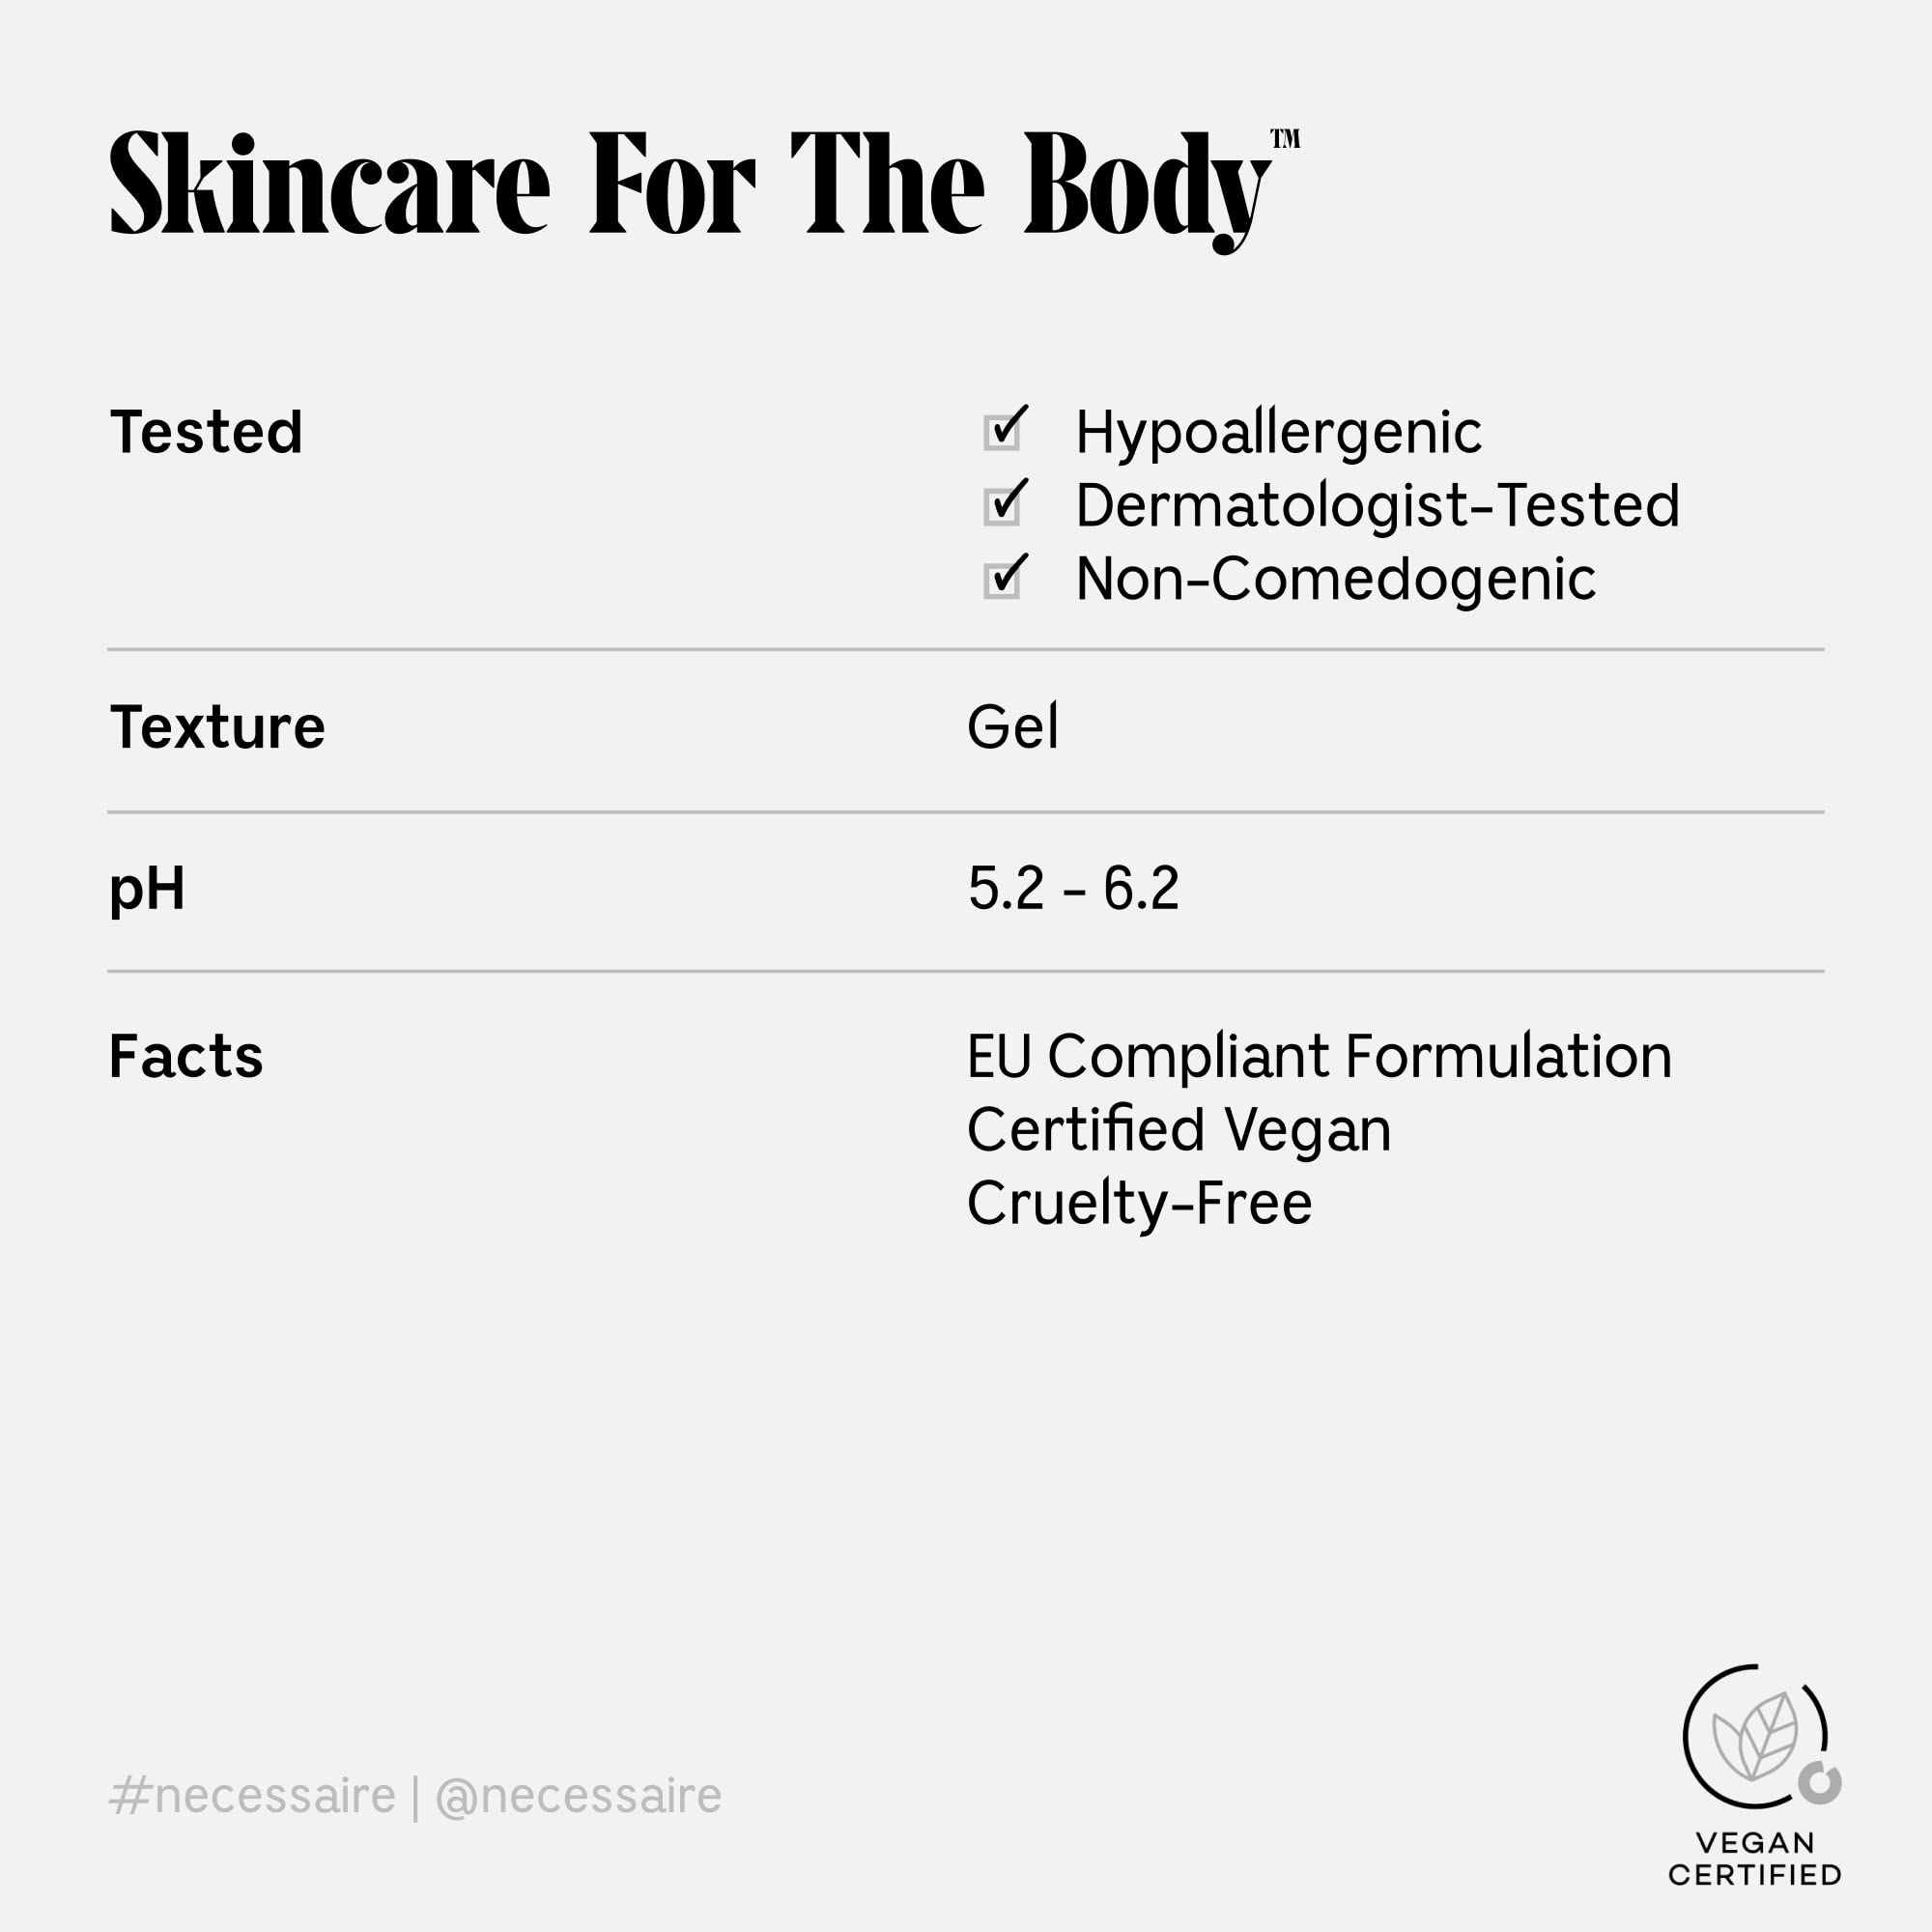 Nécessaire The Body Exfoliator. Bergamot. AHA/BHA/PHA. Activated Charcoal. Erase KP. Smooth Rough Patches. Release Ingrowns. Hypoallergenic. Dermatologist-Tested. Non-Comedogenic. 180 ml / 6.1 fl oz